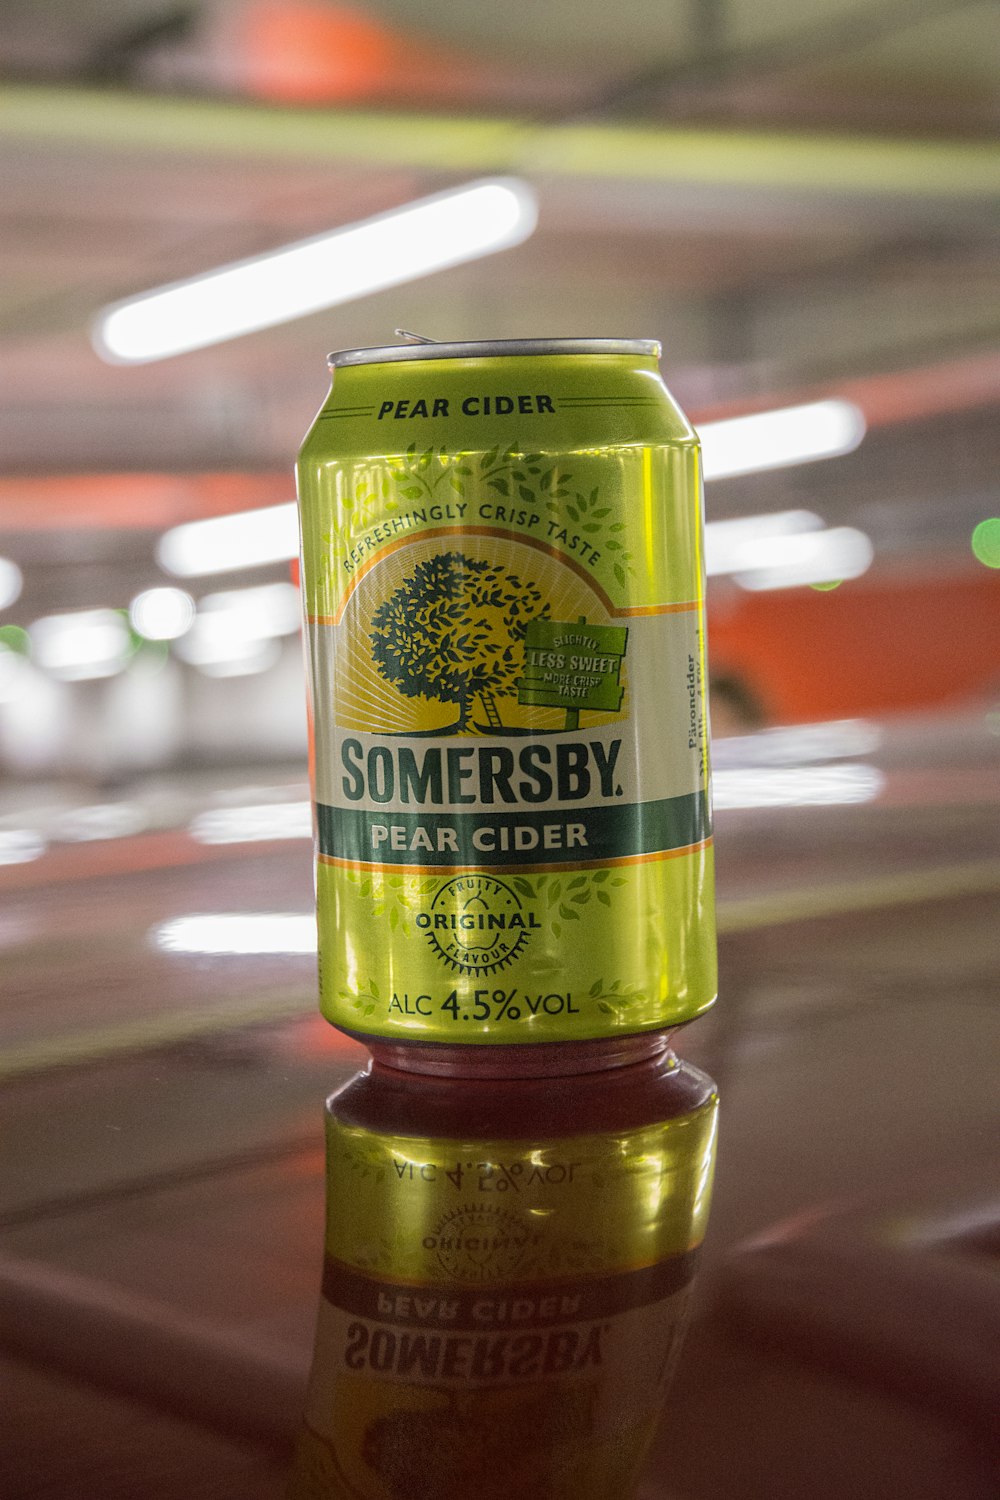 Somersby Pear Cider can